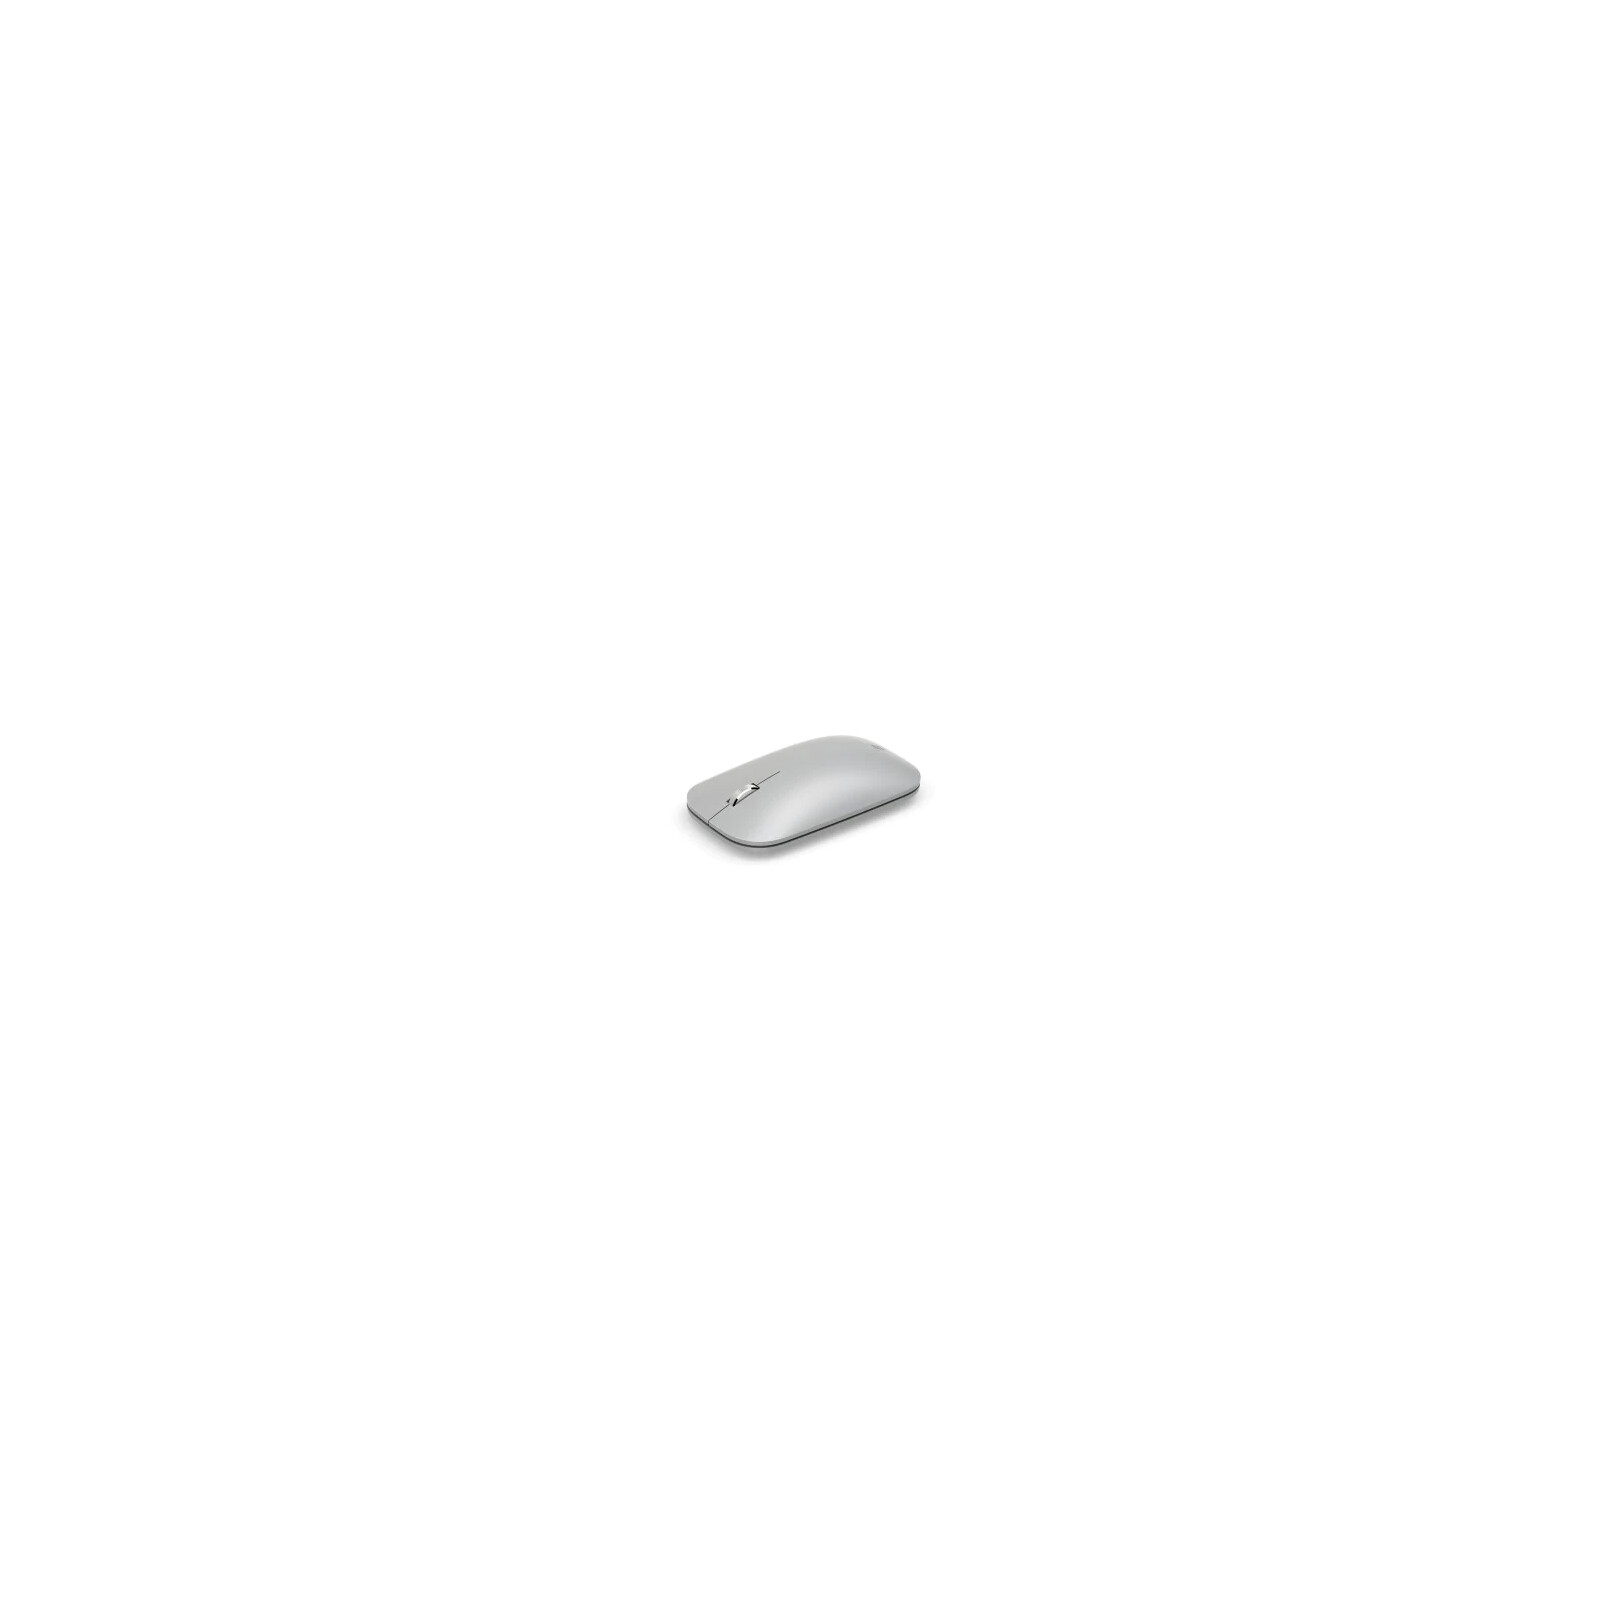 Microsoft Surface Mobile Mouse Bluetooth